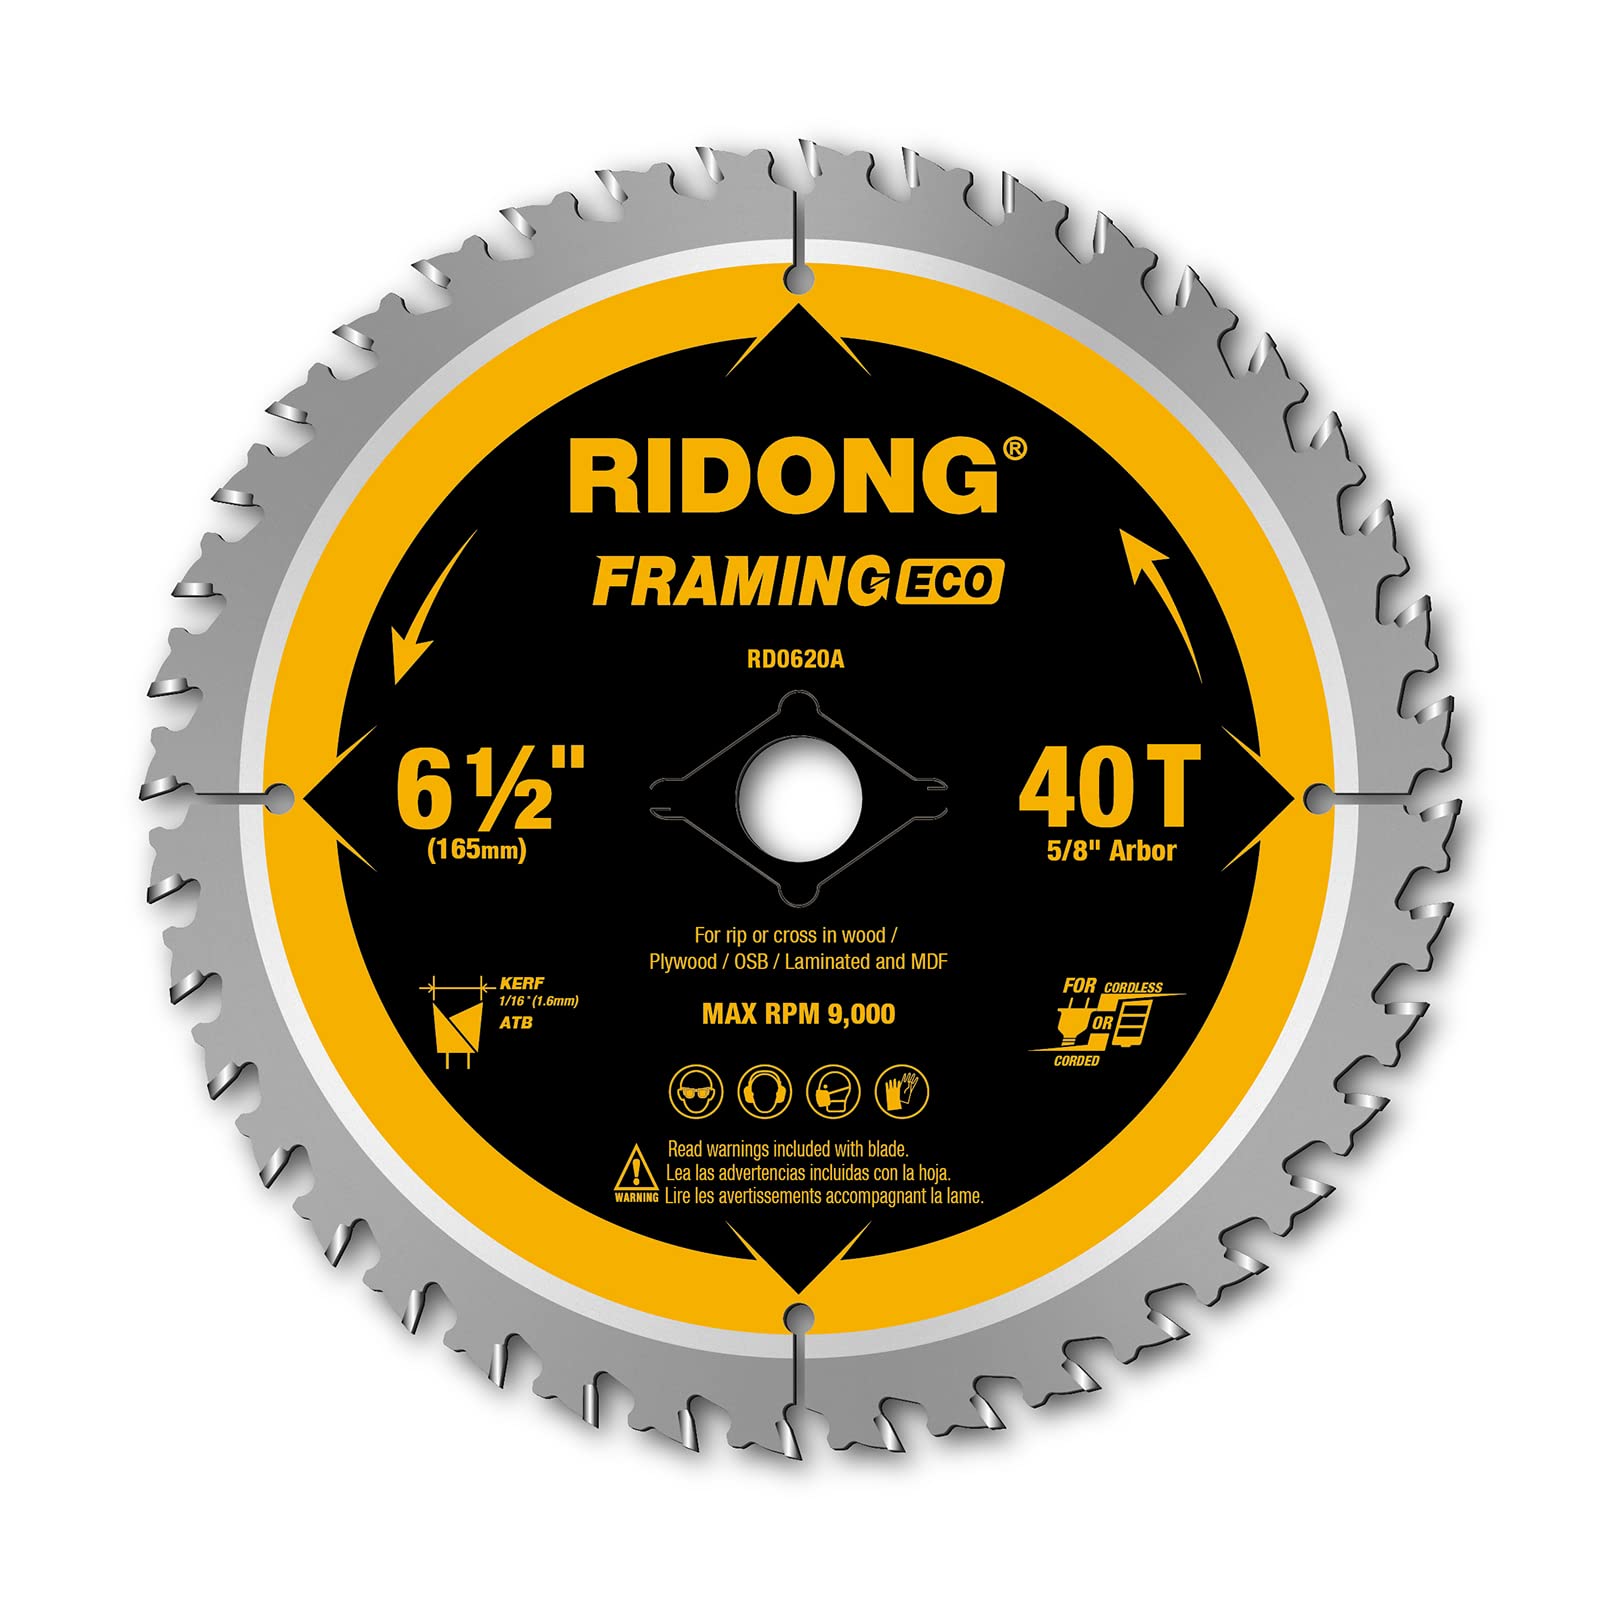 RIDONG 6-1/2 Inch 40 Tooth Circular Saw Blade with 5/8 Inch Arbor ATB Finishing for Wood Cutting(5-Packs)